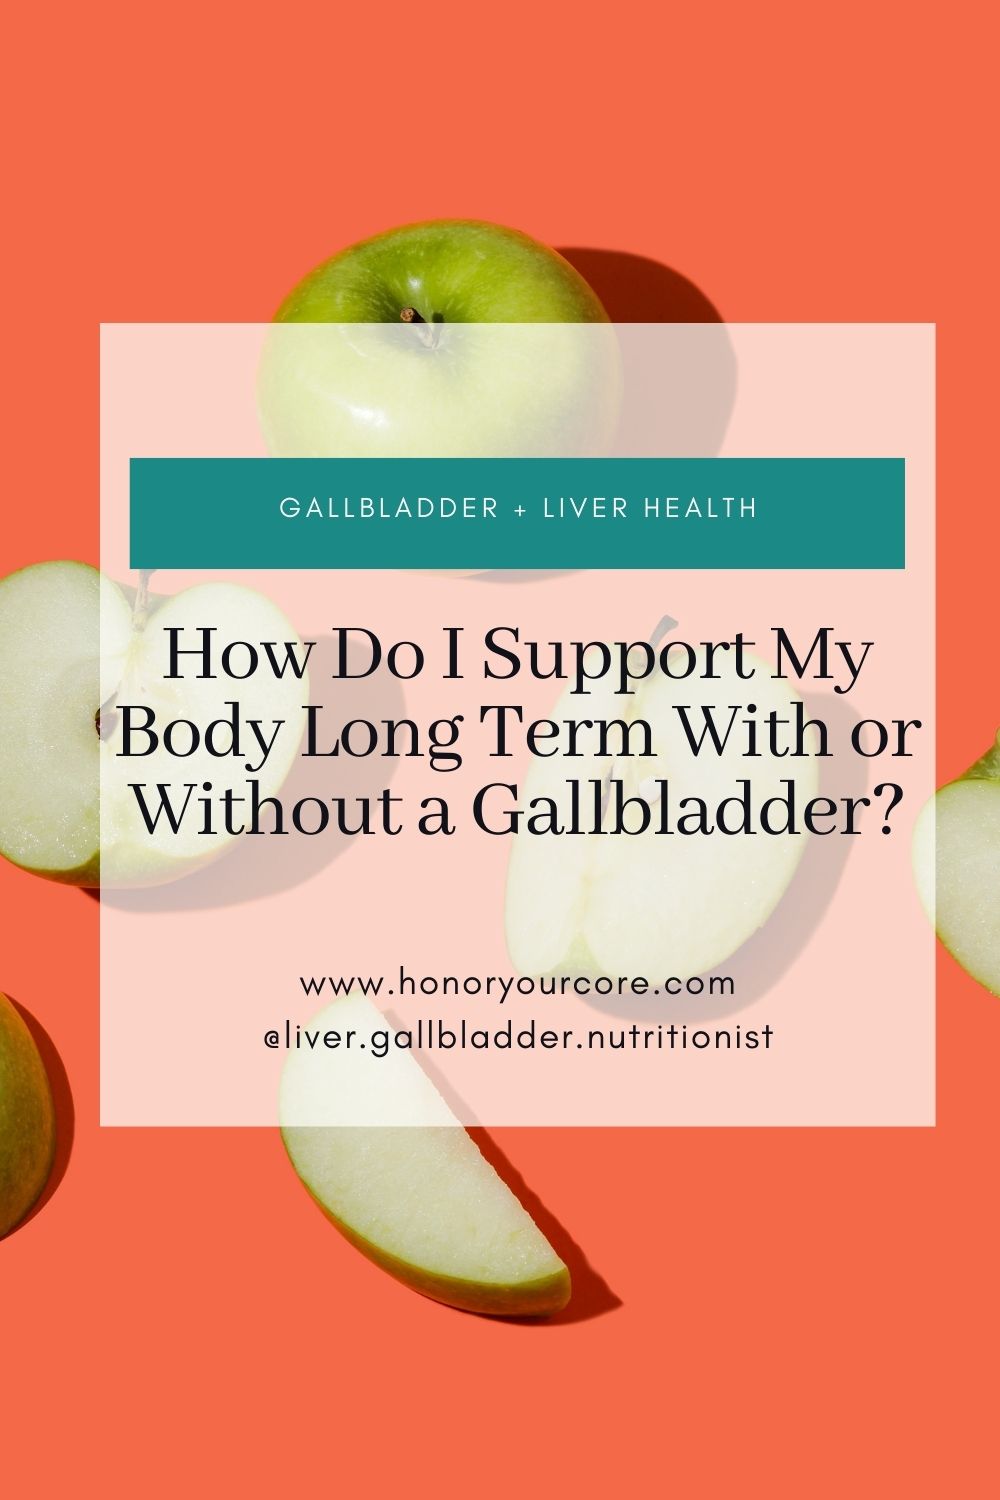 How Do I Support My Body Long Term With or Without a Gallbladder?